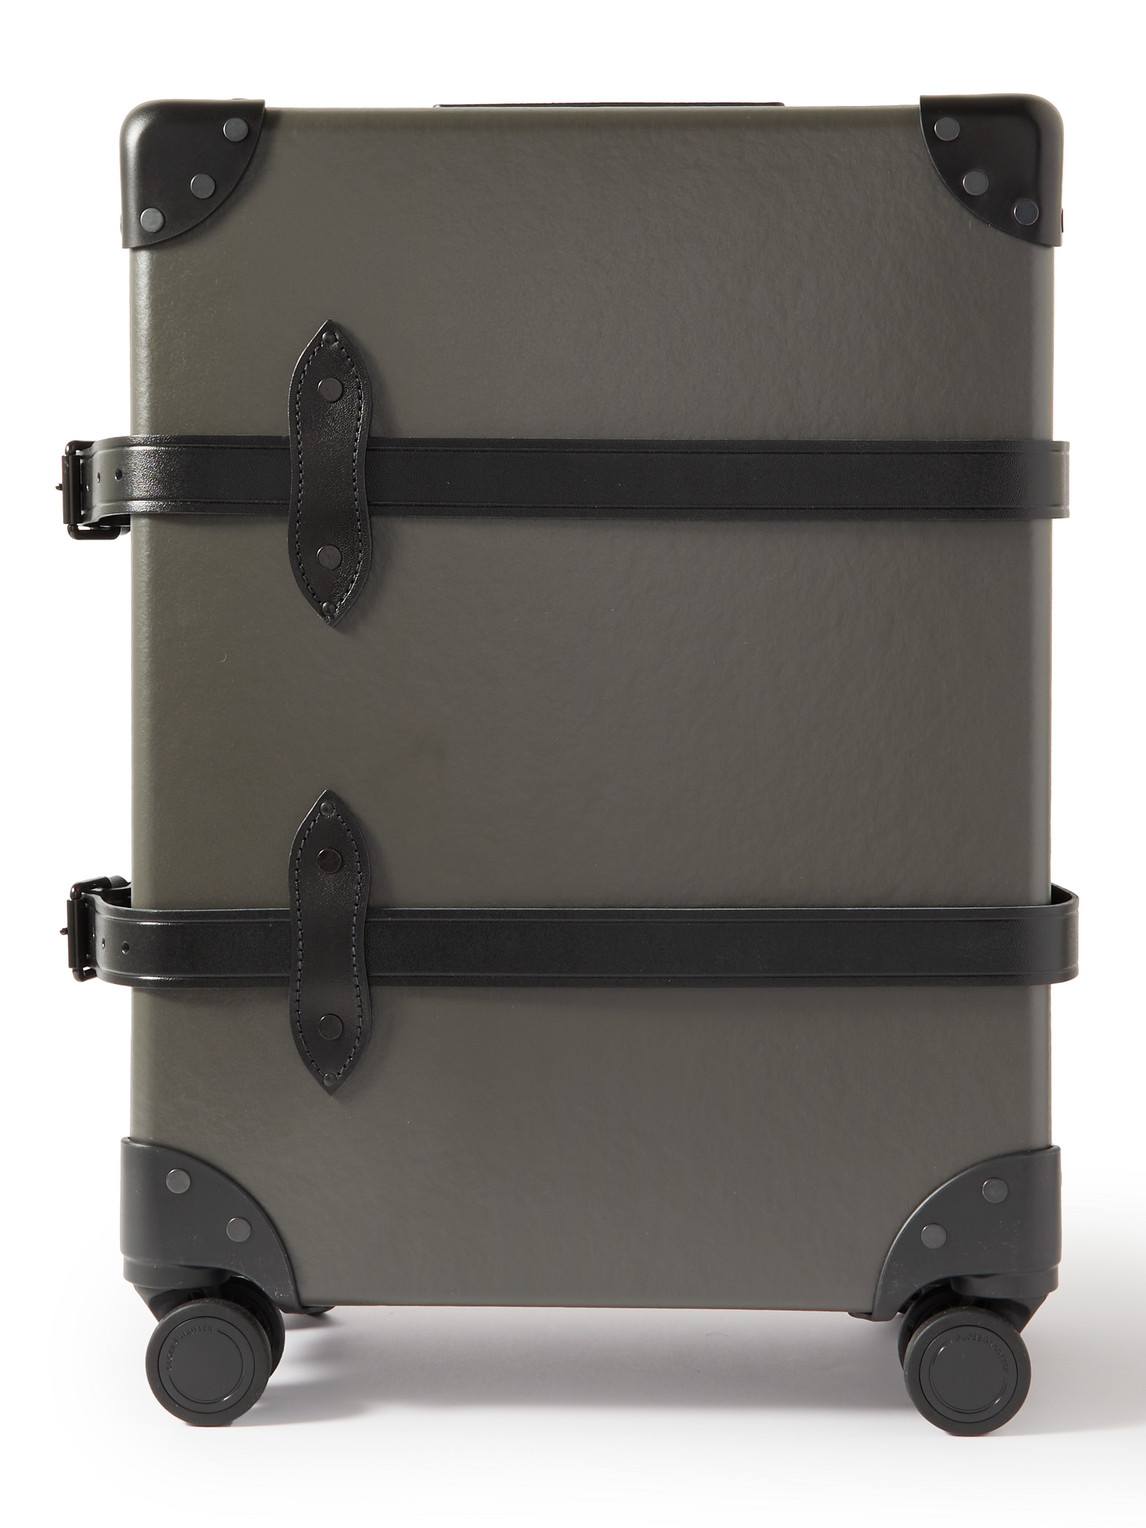 Centenary Leather-Trimmed Carry-On Suitcase